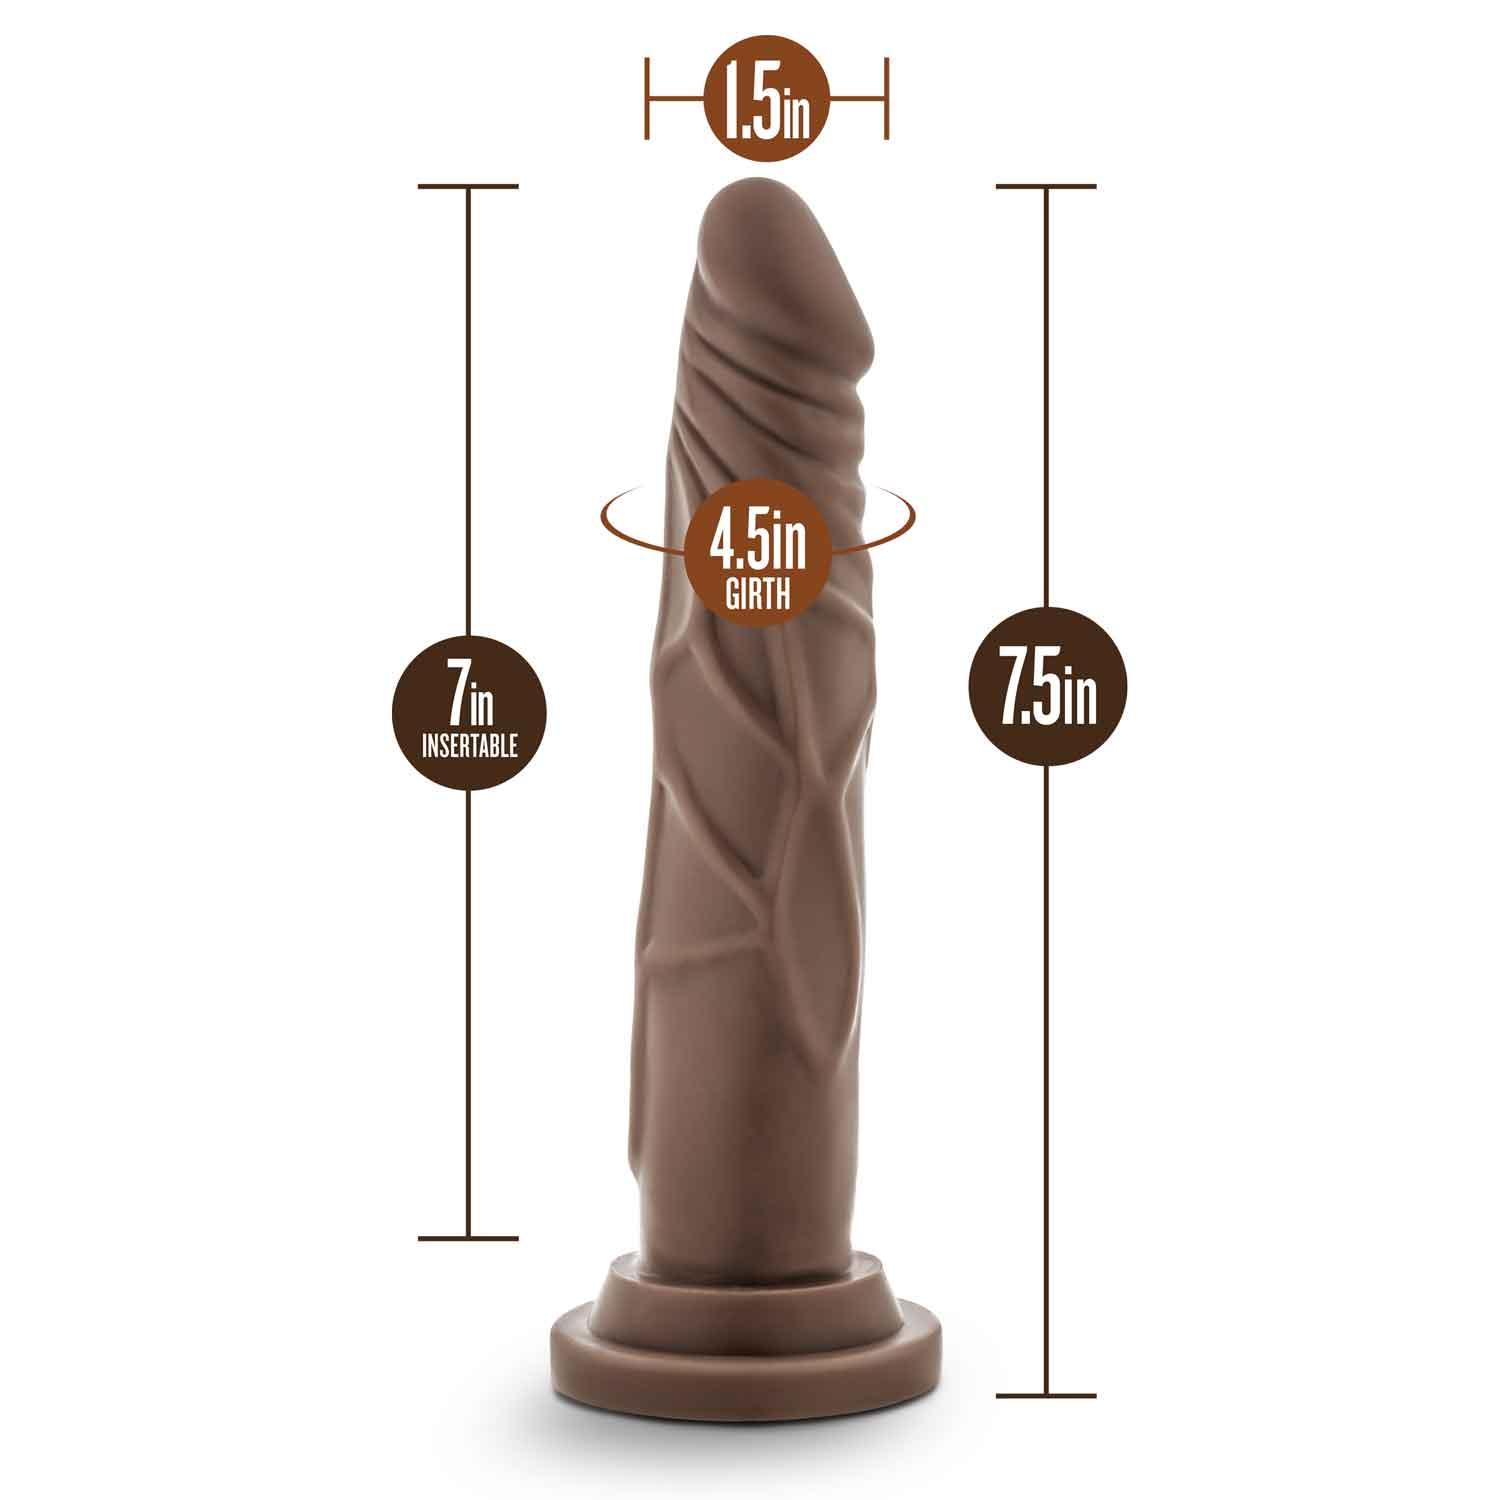 Dr. Skin Silicone - Dr. Carter - 7 Inch Dong With Suction Cup - Chocolate - My Sex Toy Hub